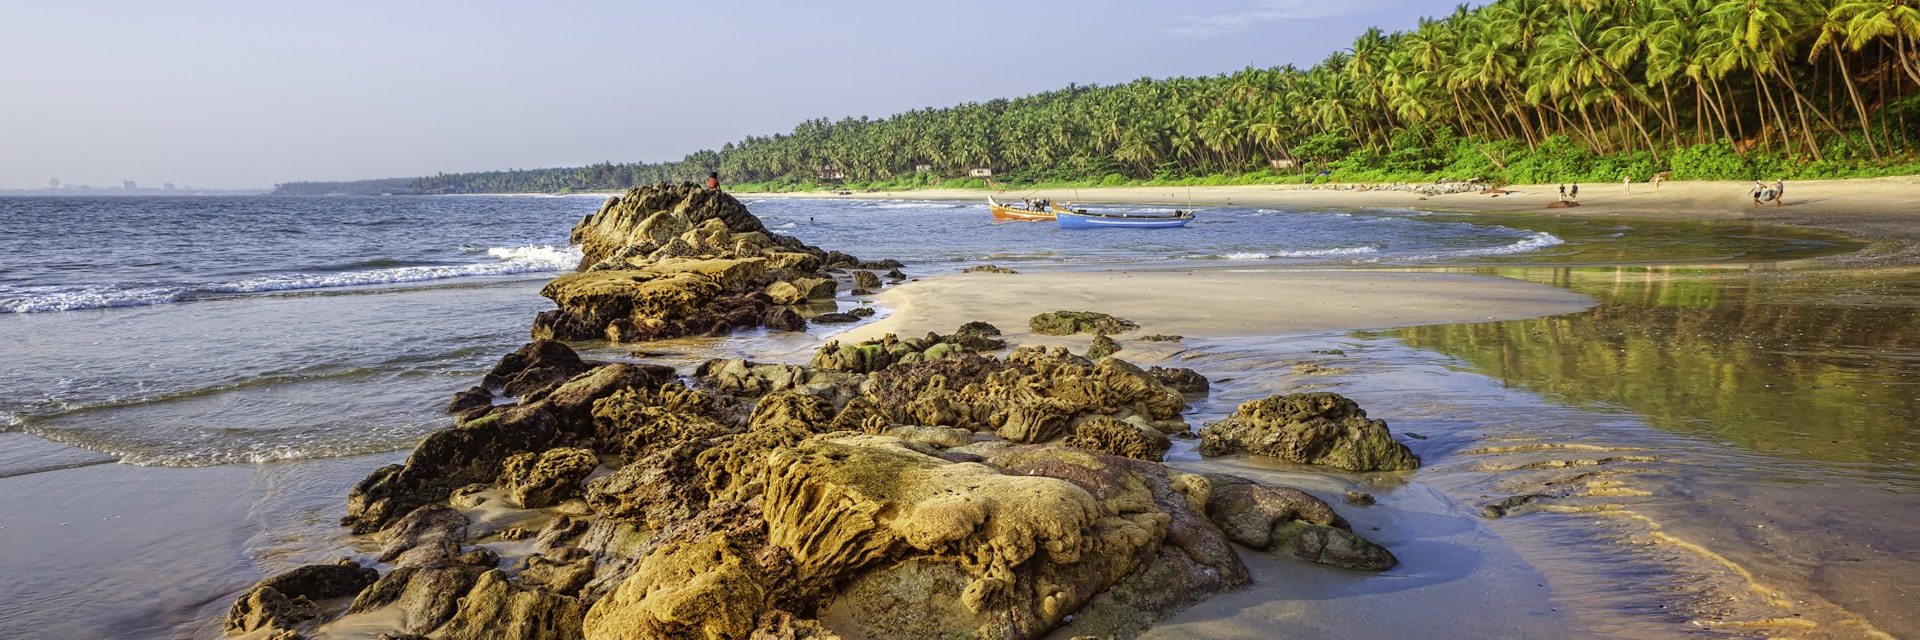 Kannur, December 10, 2011: Sunbathers and fishermen with boats on Cherai beach showing rocks formations in the foreground and coconut palms as backdrop at sunset along Malabar coastline, Kannur, Kerala, south India.